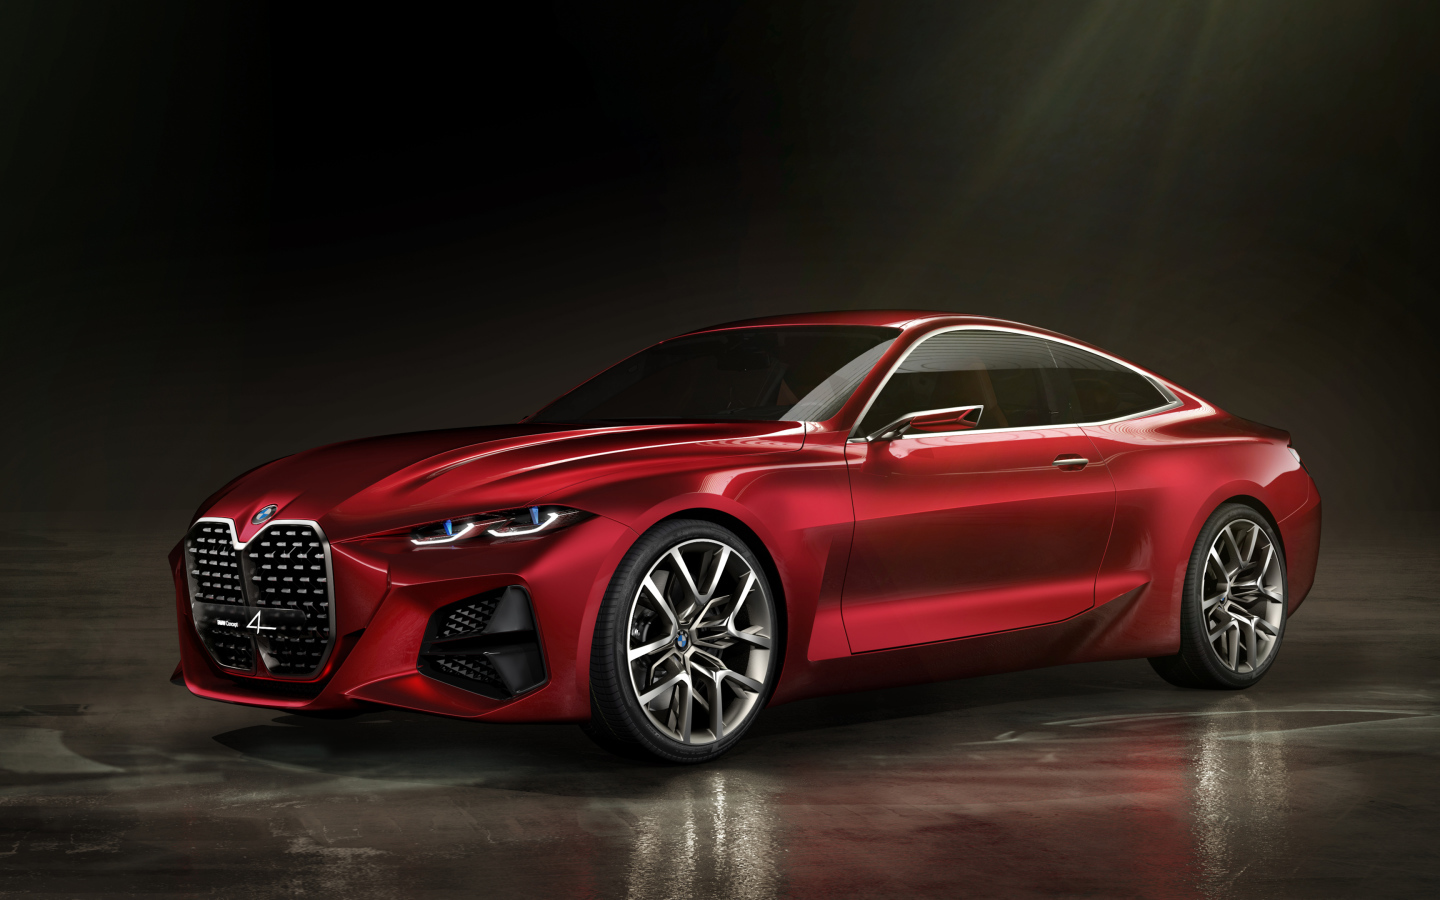 2019 red BMW Concept 4 car